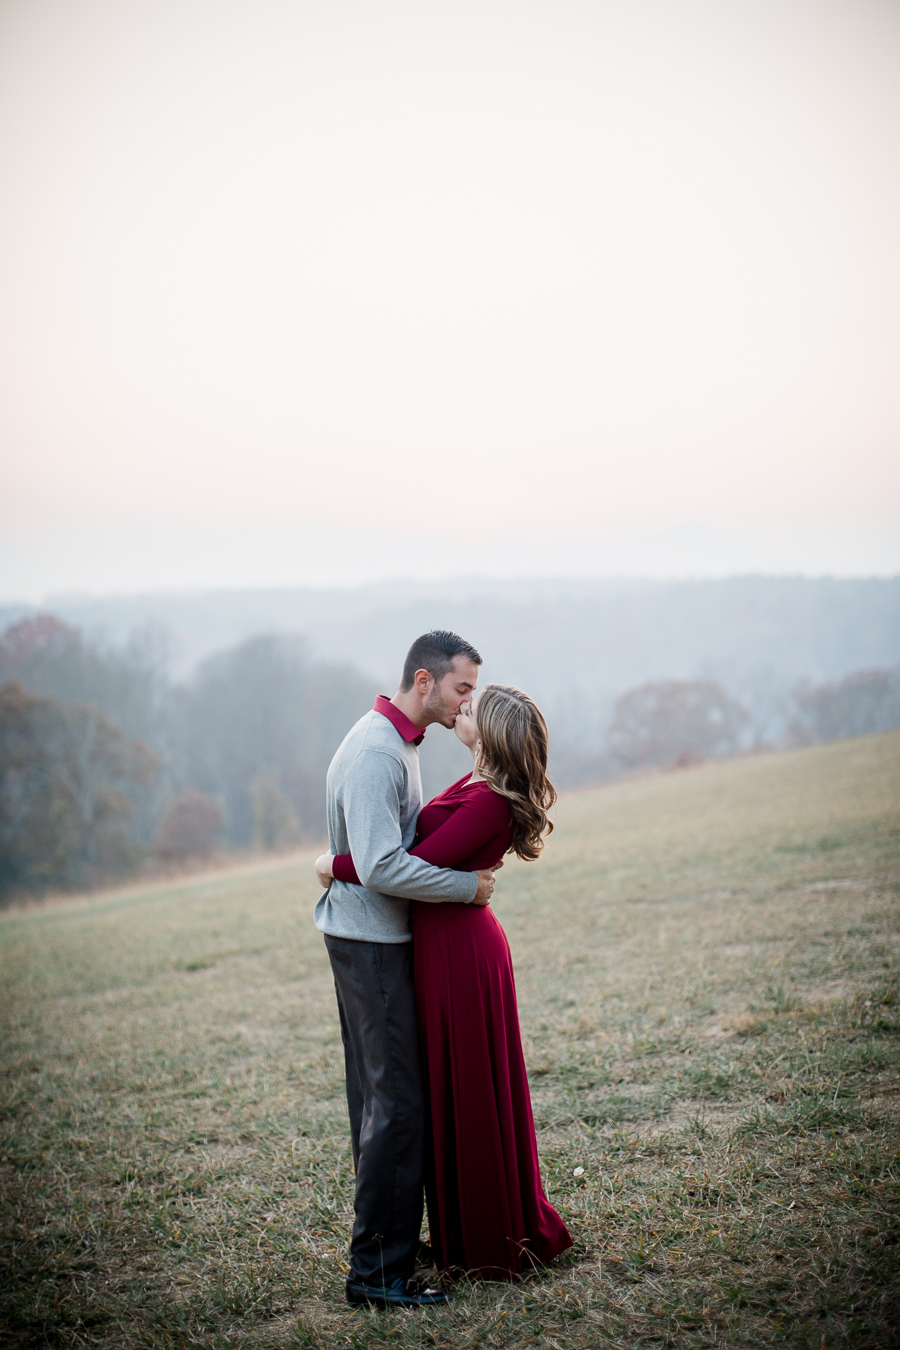 Kissing in the fog engagement photo by Knoxville Wedding Photographer, Amanda May Photos.